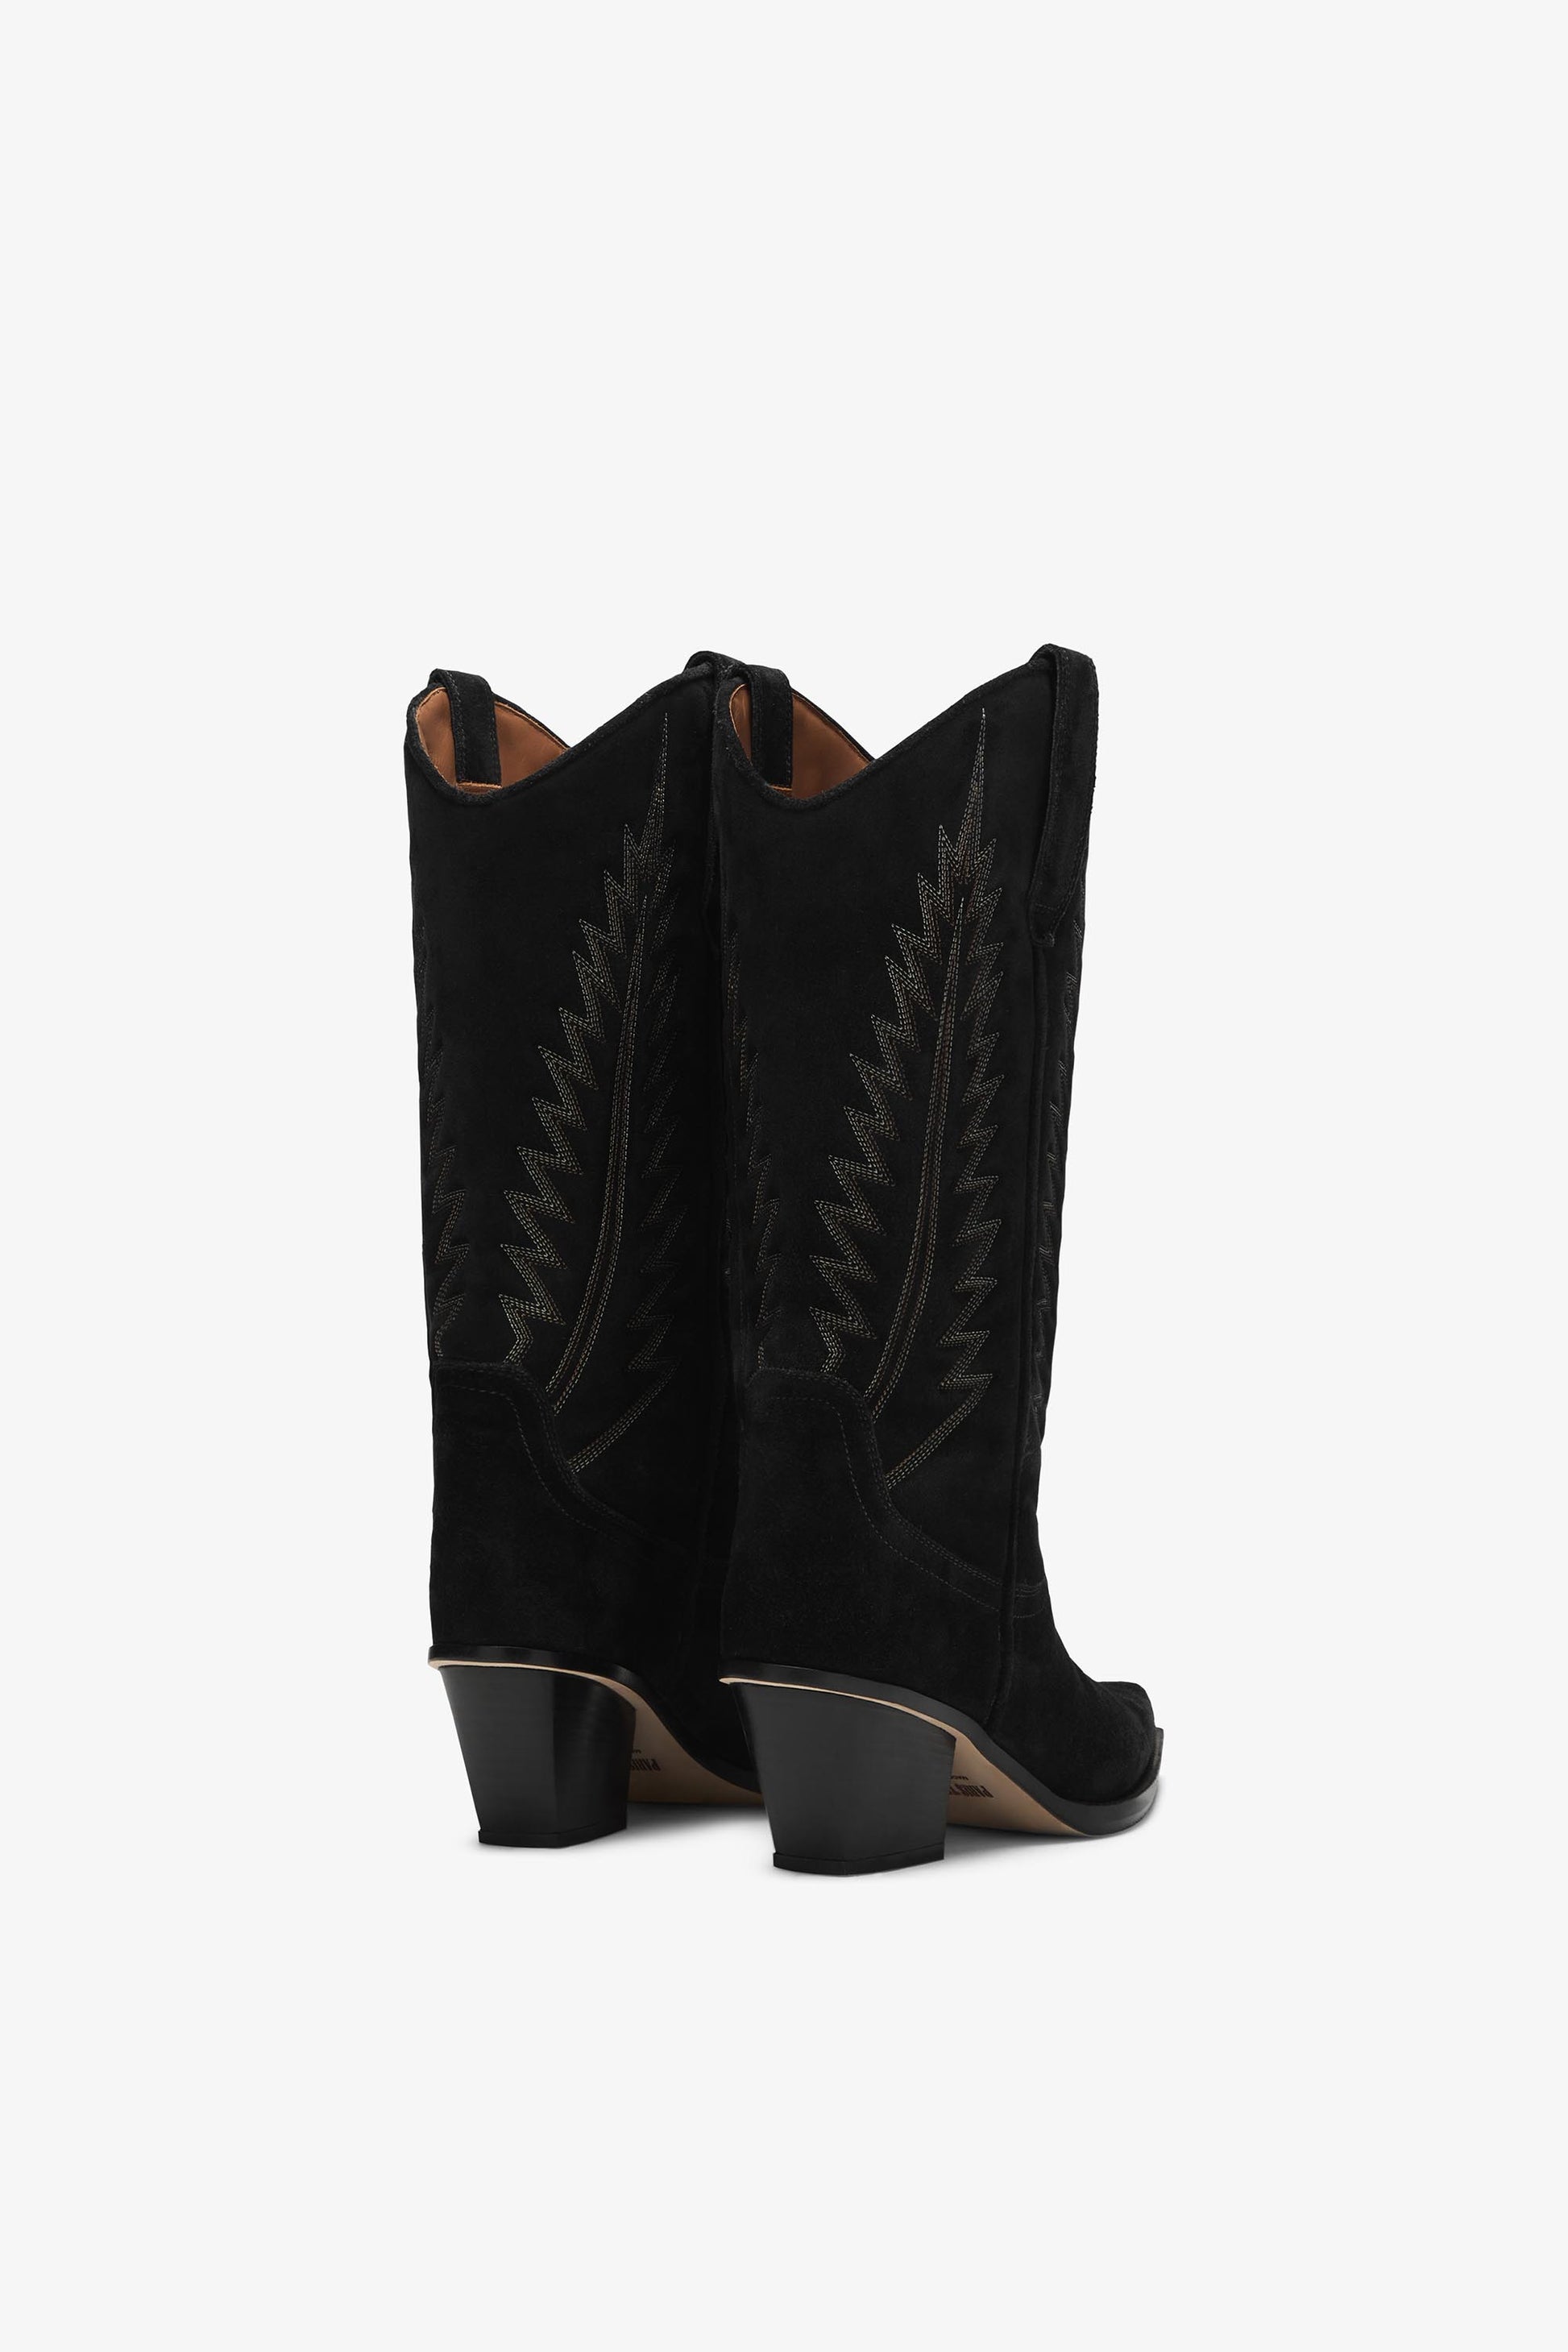 Black suede boot